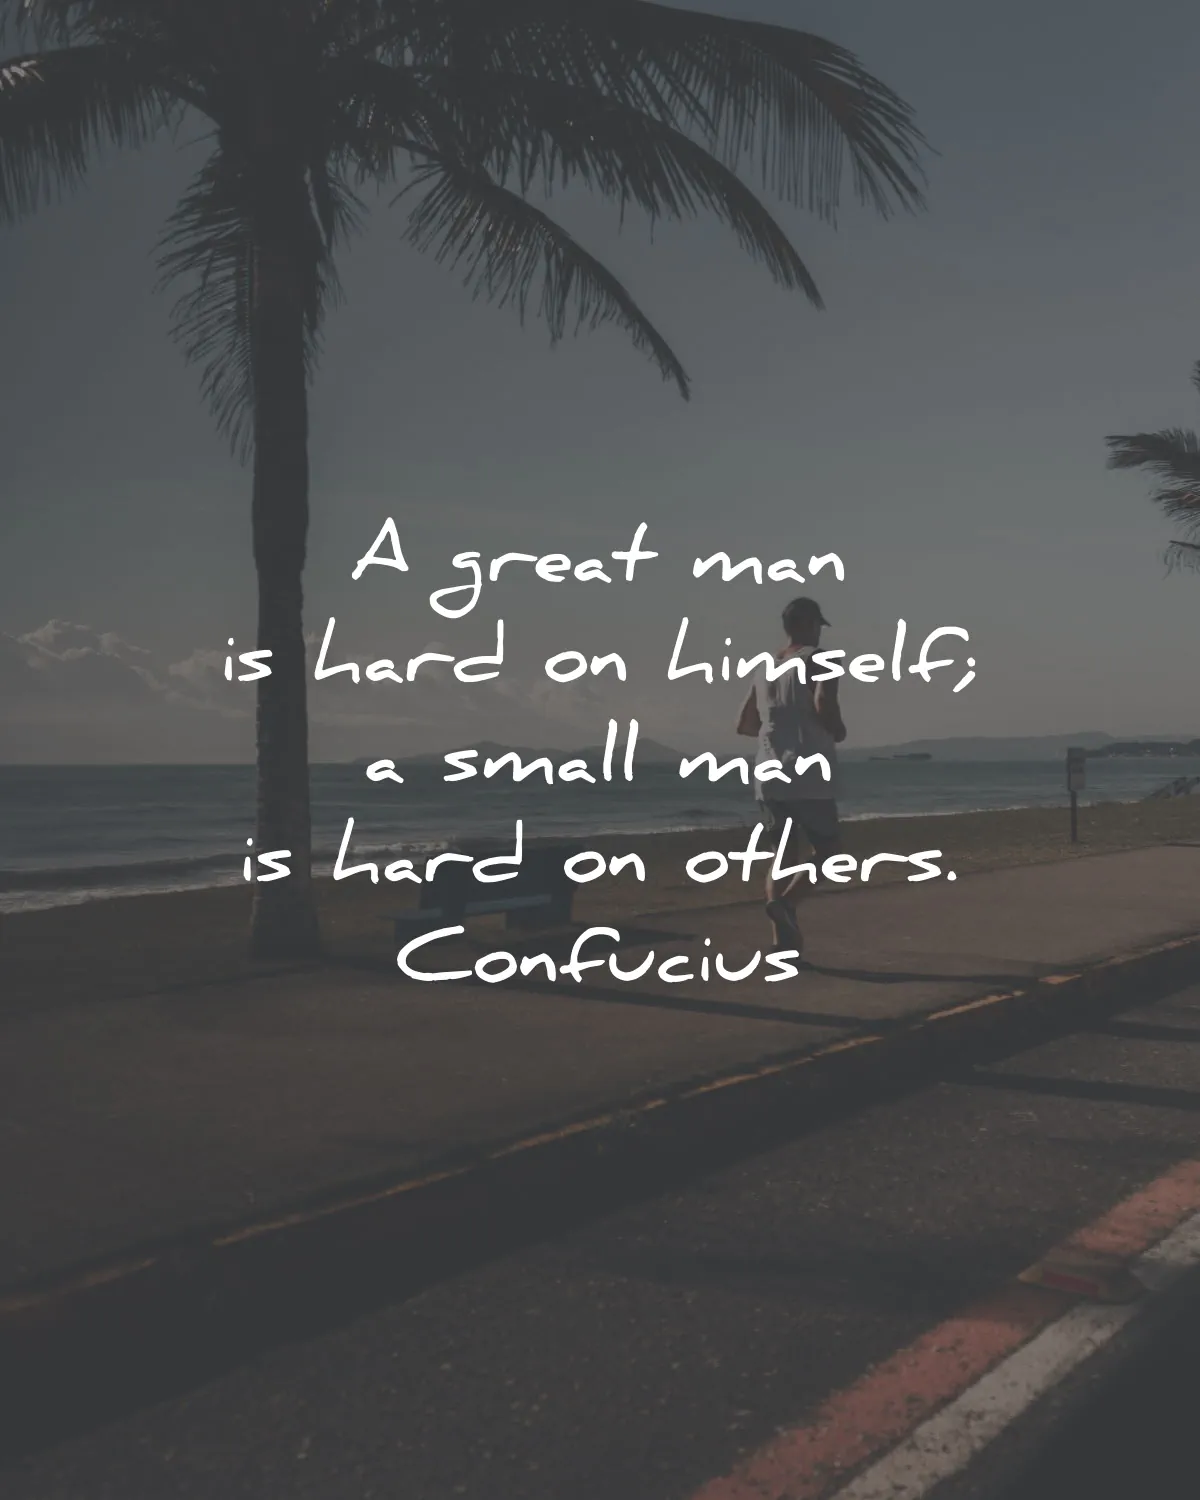 confucius quotes great man hard himself small others wisdom